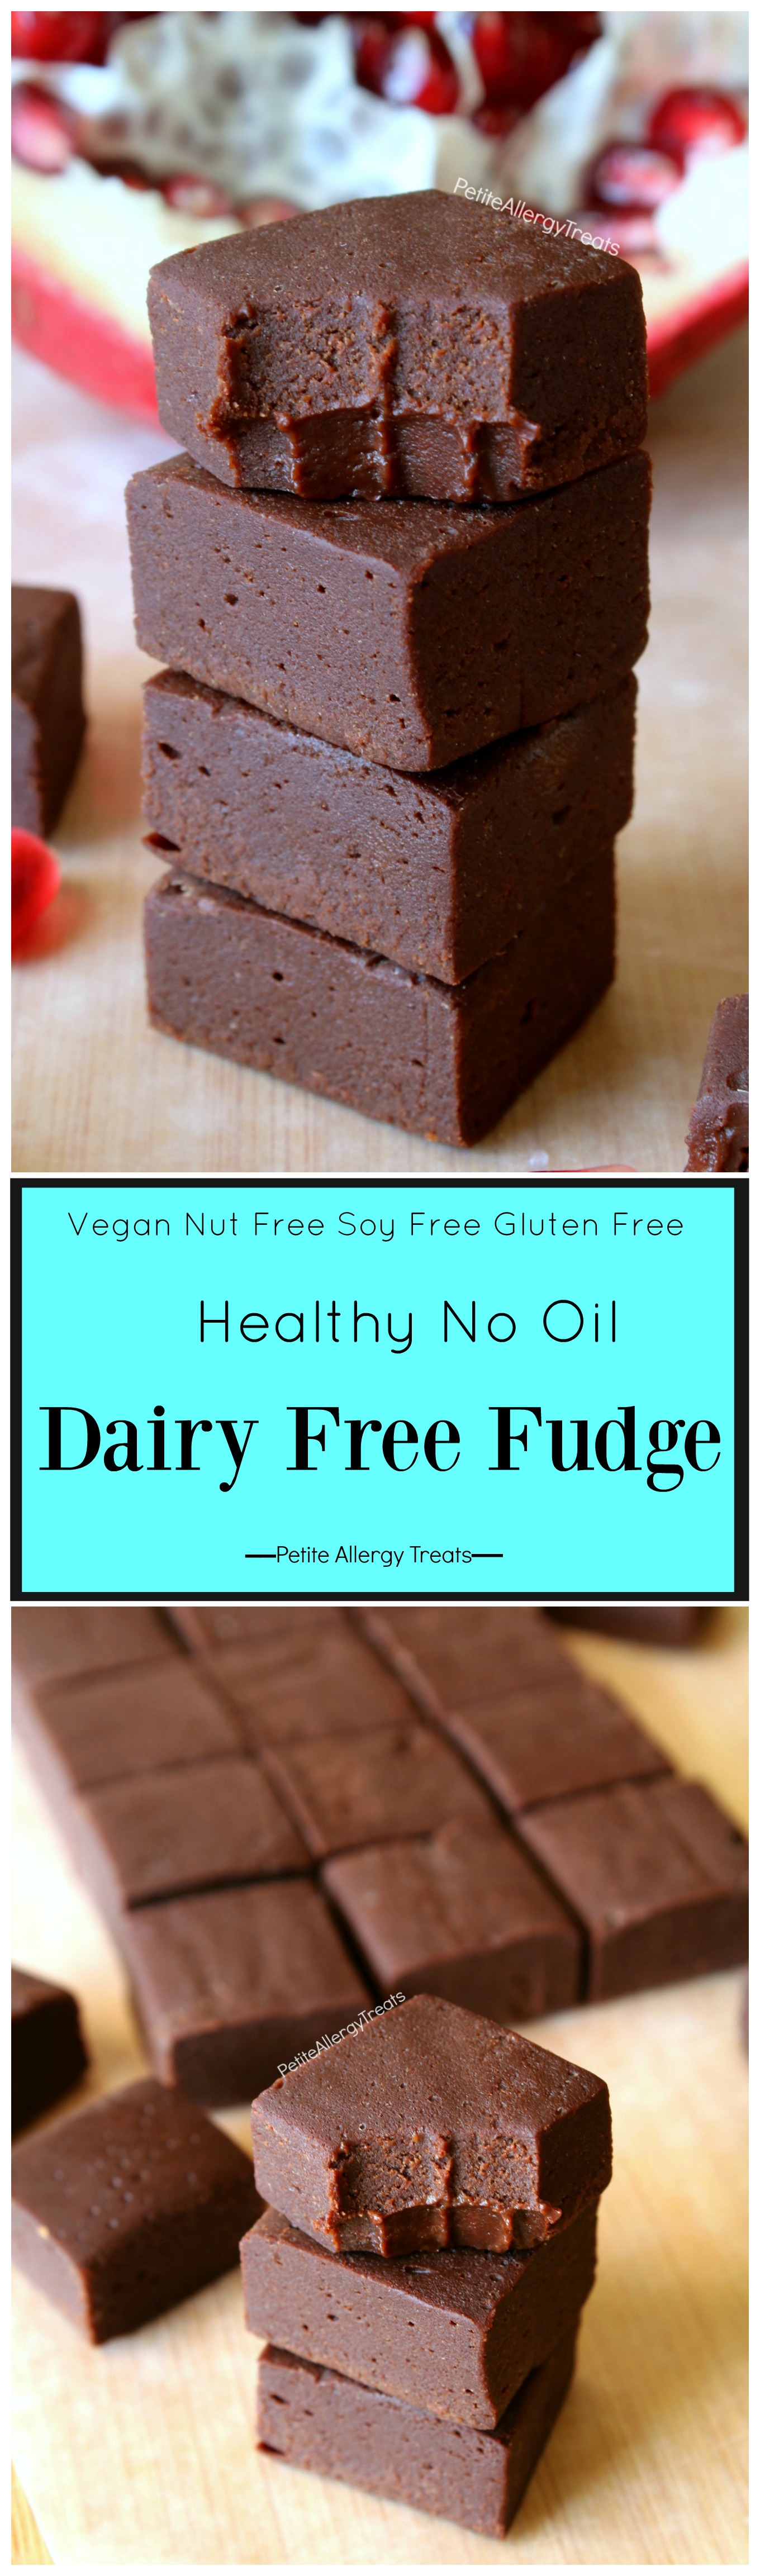 Healthy Dairy Free Fudge Recipe (vegan gluten free)- Healthy chocolate fudge (with vegetables) for Valentine's or any day! Dye free gluten free and food allergy friendly